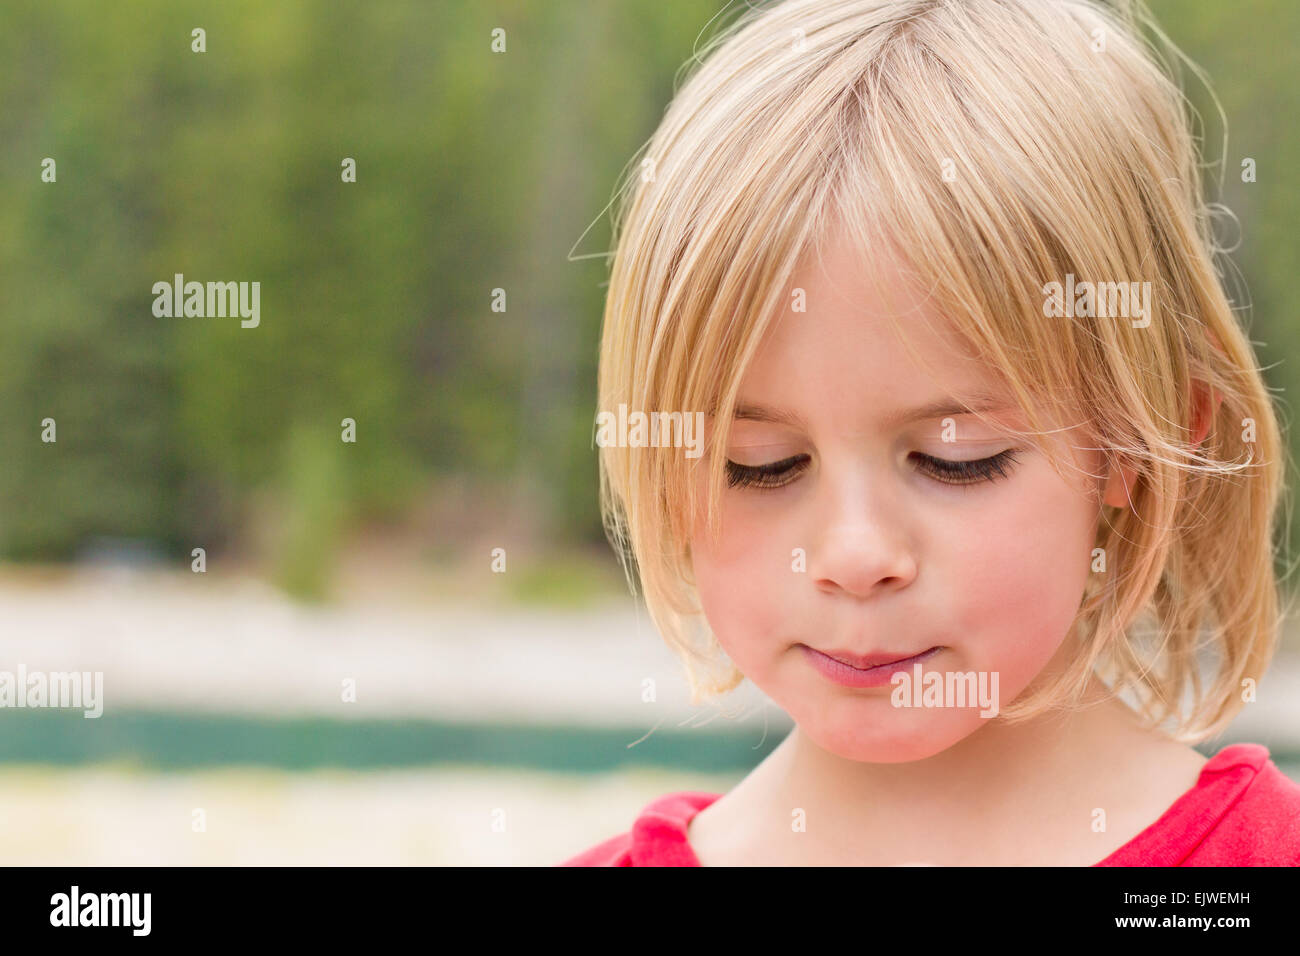 Timid Little Girl Looking Down with a Shy Look Stock Photo